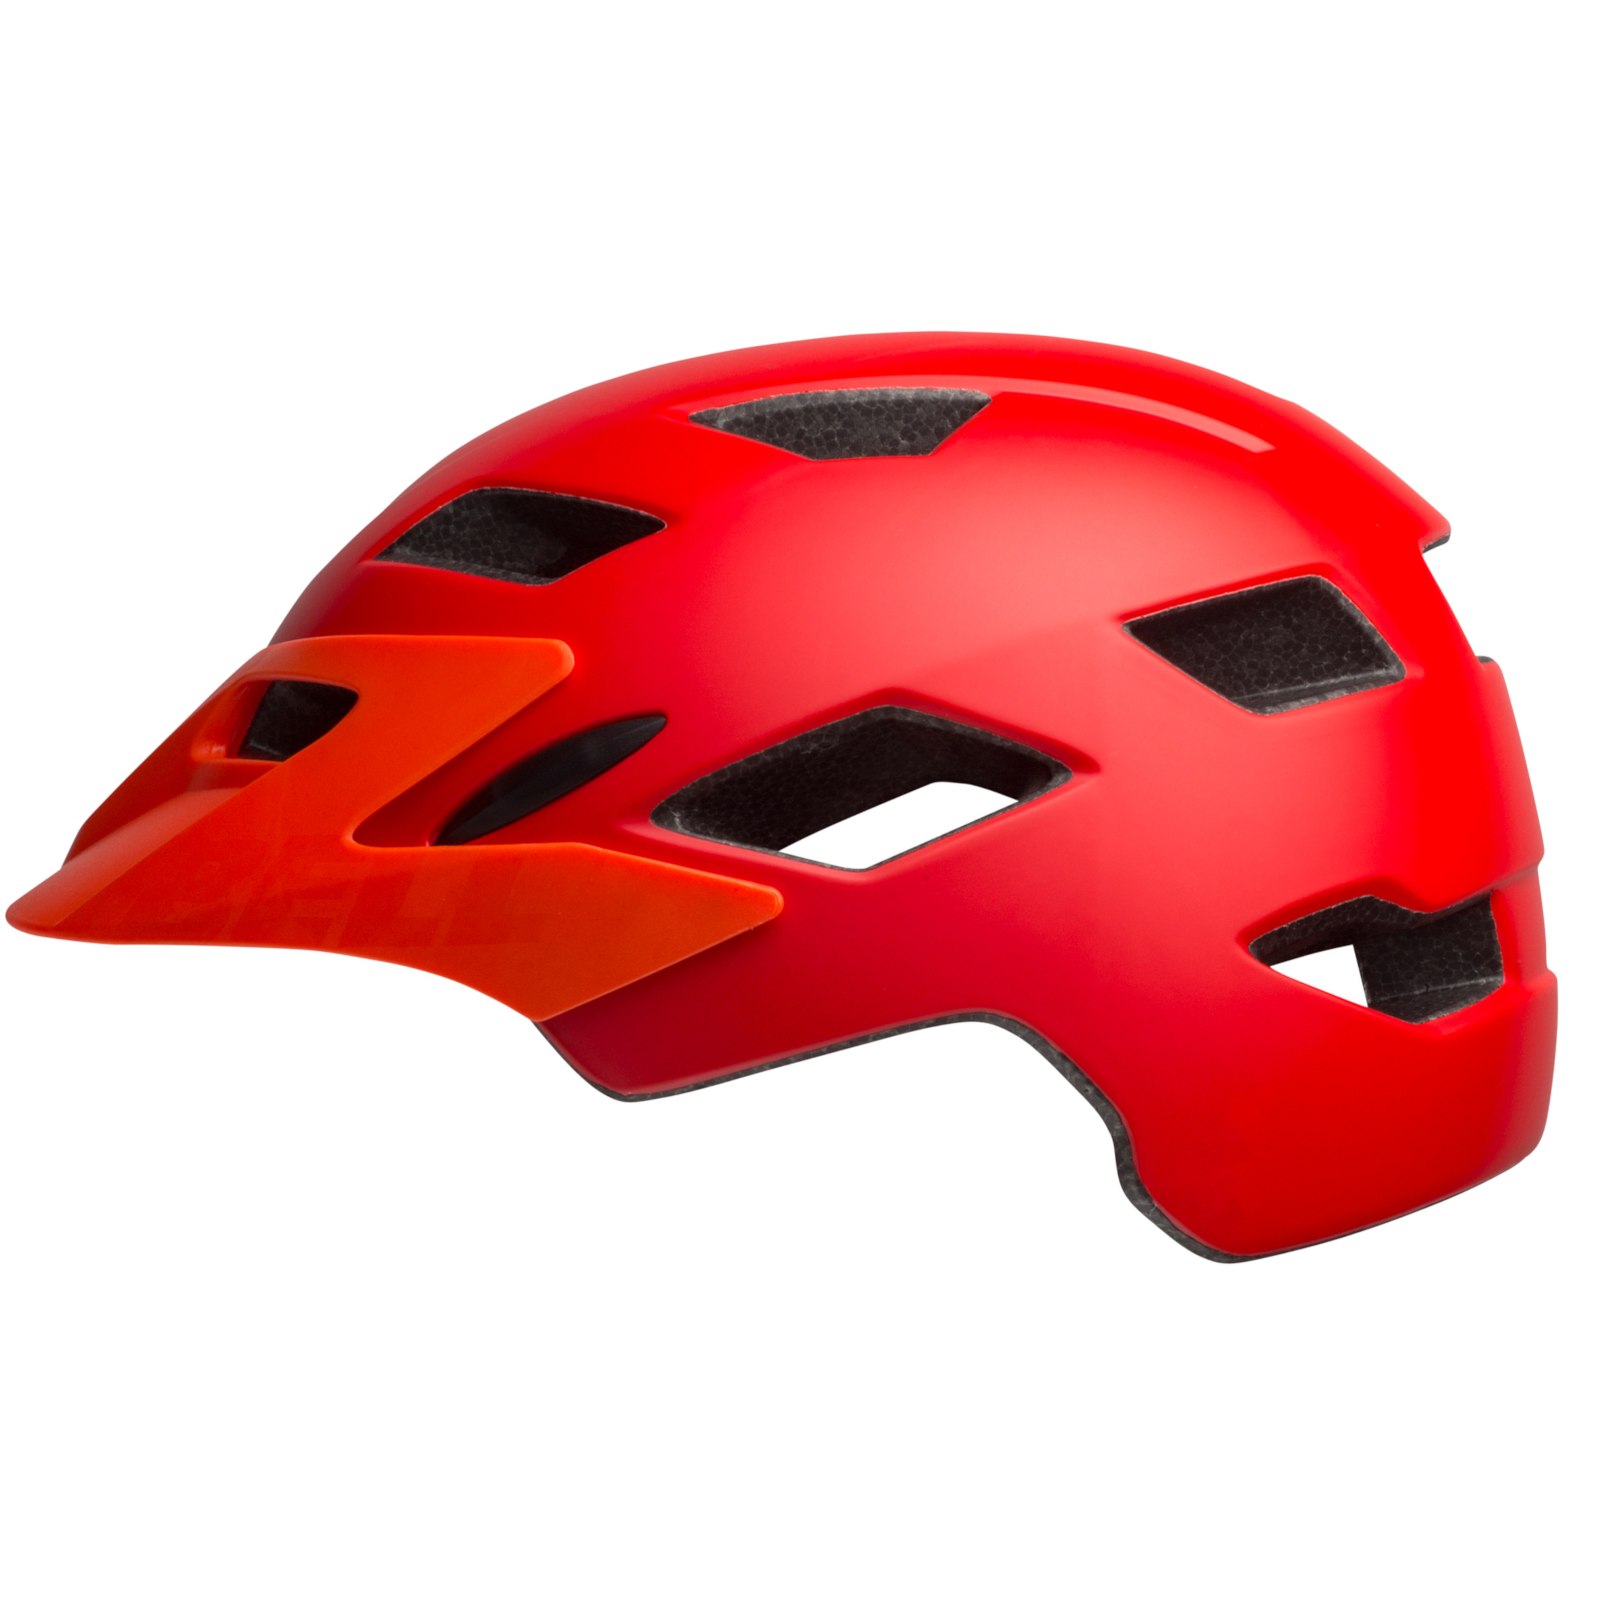 Picture of Bell Sidetrack Youth Helmet - matte red/orange